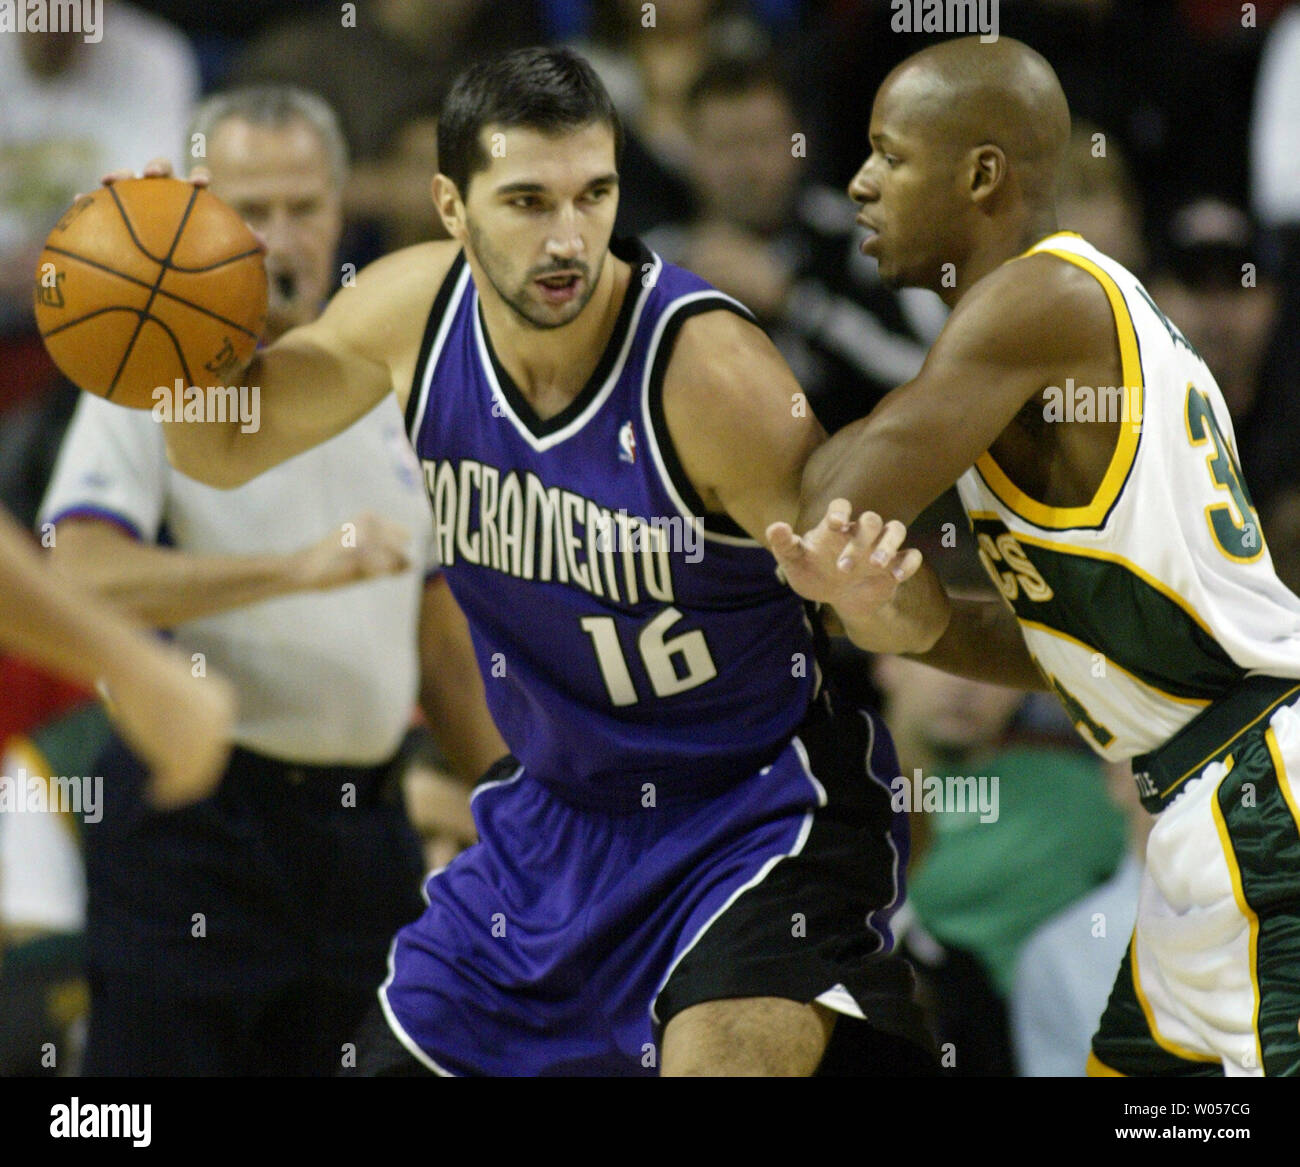 Peja Stojakovic from the Sacramento Kings, shooting from the free throw  line, against the Los Angeles Lakers, at Arco Arena, in Sacramento,  California on January 19, 2006. The Kings beat the Lakers